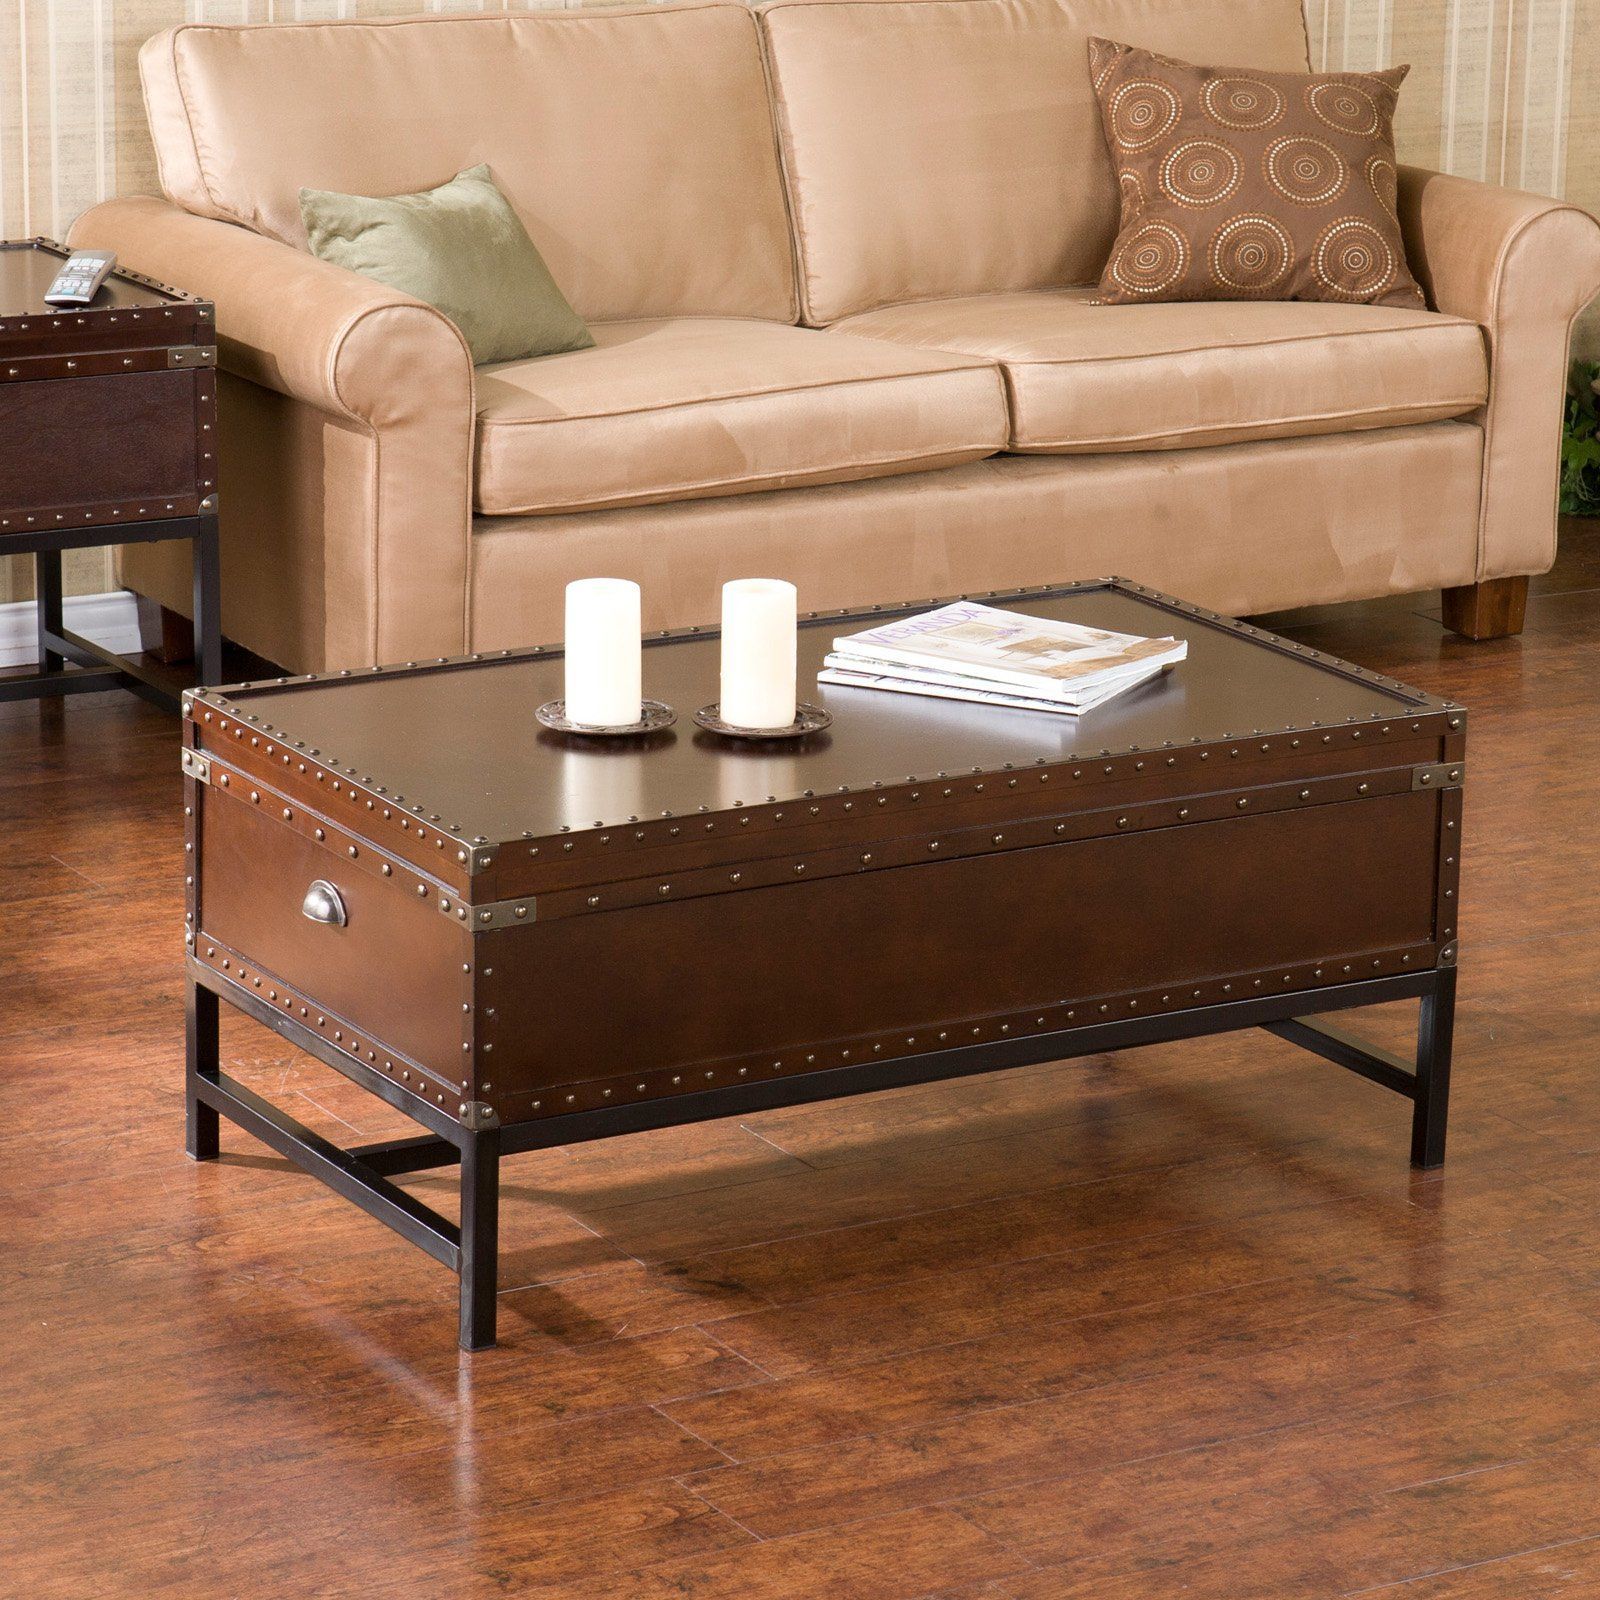 Southern Enterprises Voyager Espresso Trunk Coffee Table | Coffee Table In Southern Enterprises Larksmill Coffee Tables (View 15 of 20)